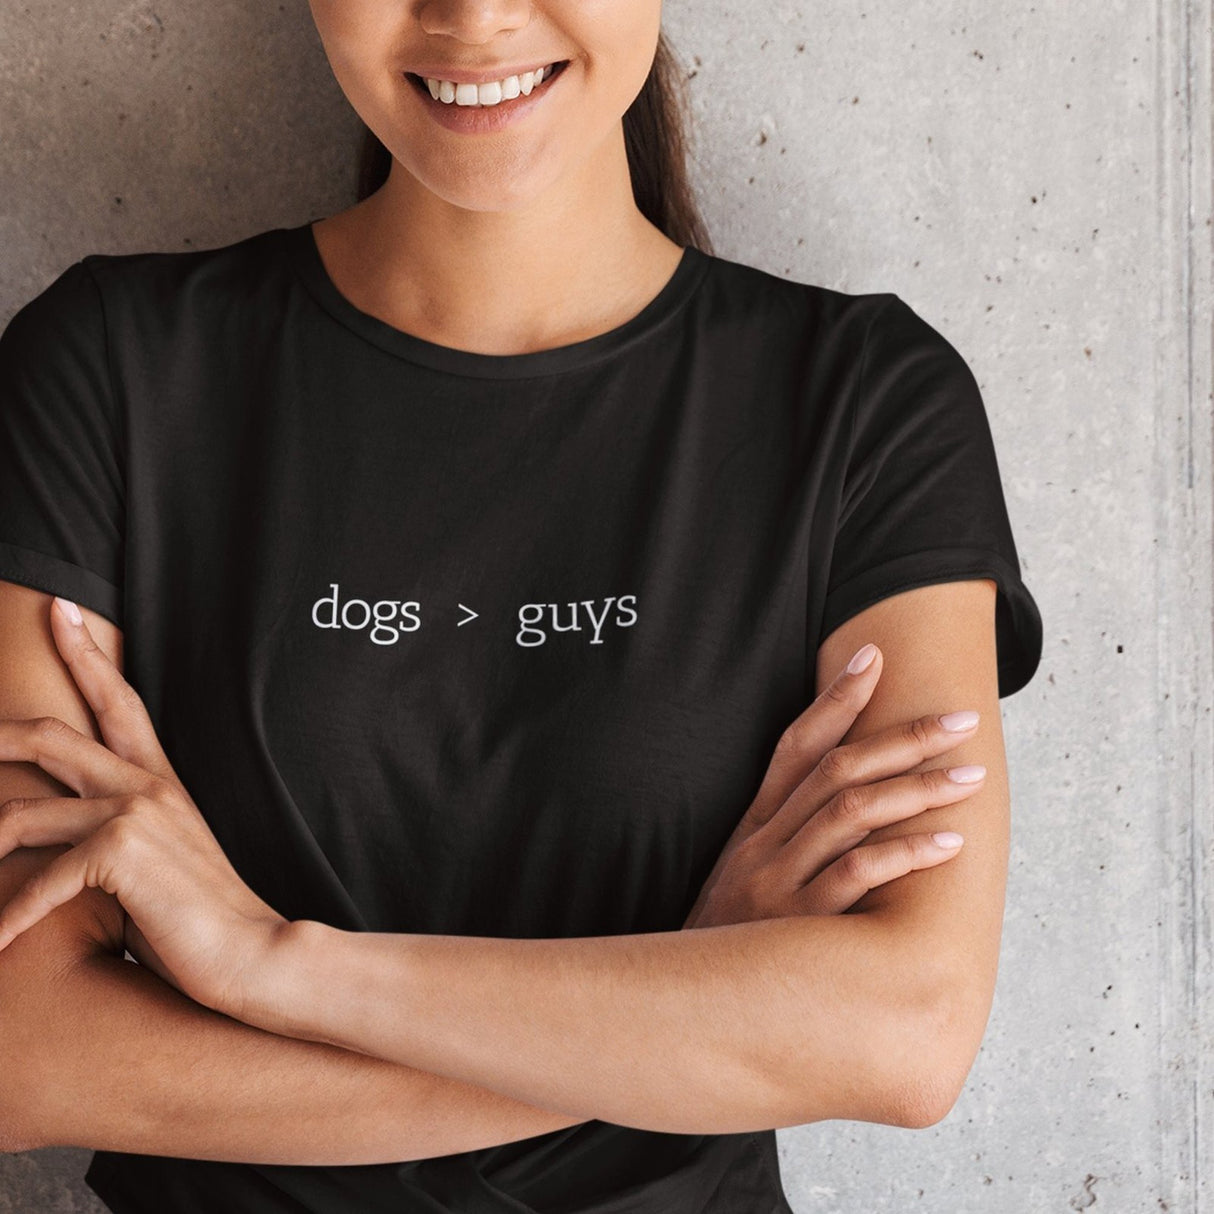 dogs-are-greater-than-guys-dog-tee-guys-t-shirt-greater-than-tee-dog-lover-t-shirt-ladies-tee#color_black